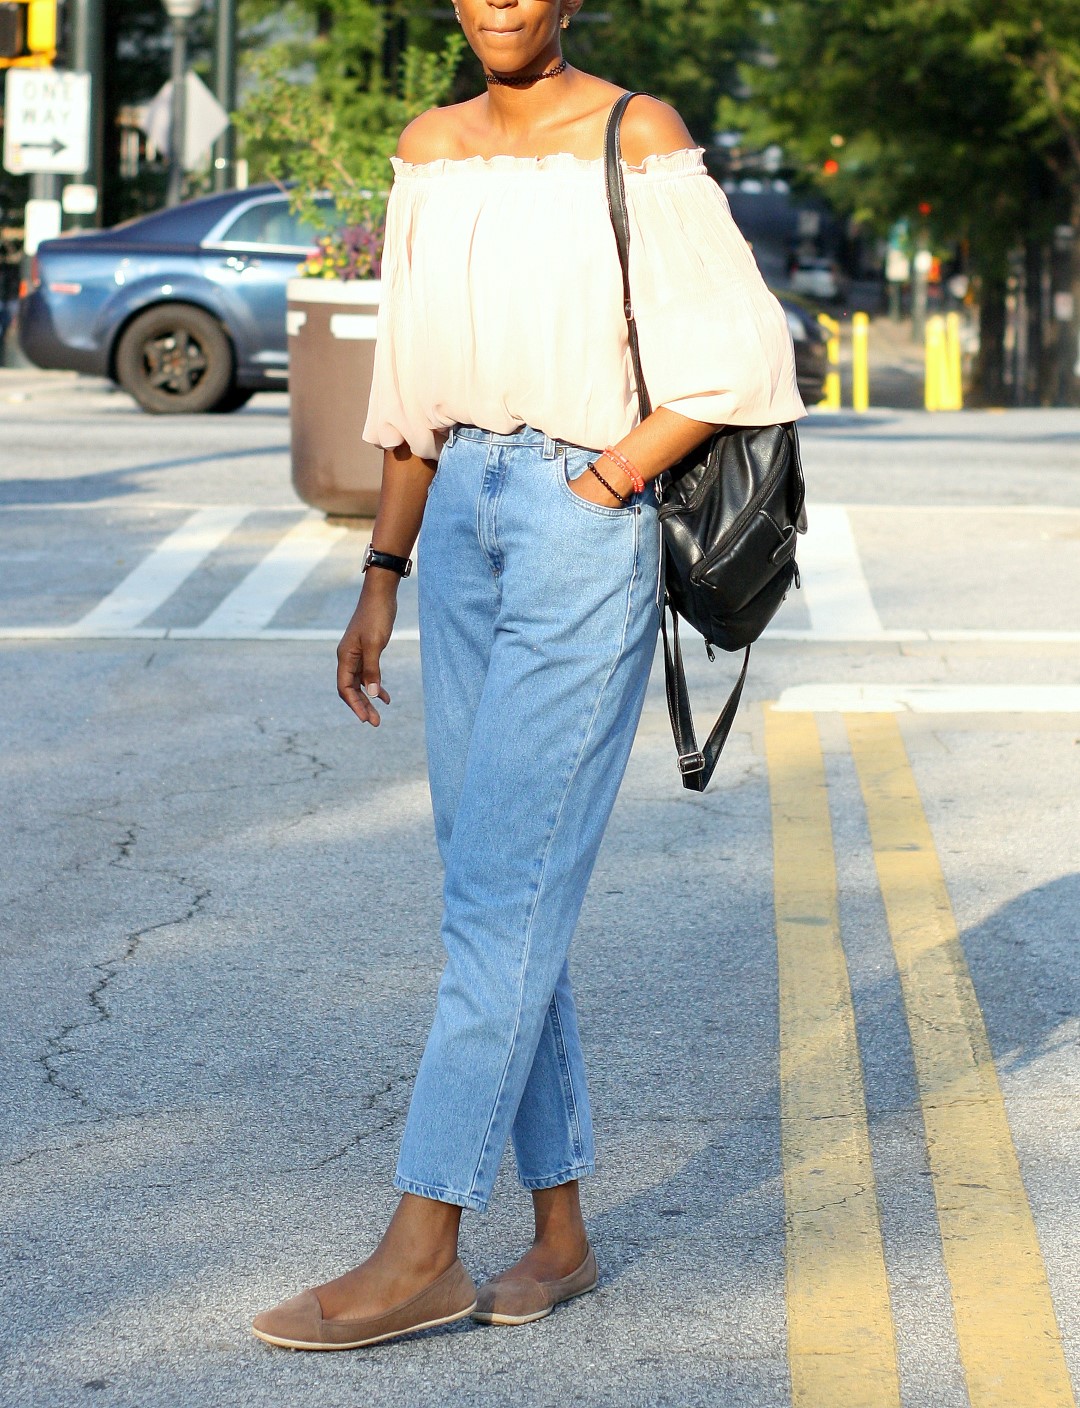 Style blogger Cassie Daves in high waisted jeans with off shoulder top and brown flats